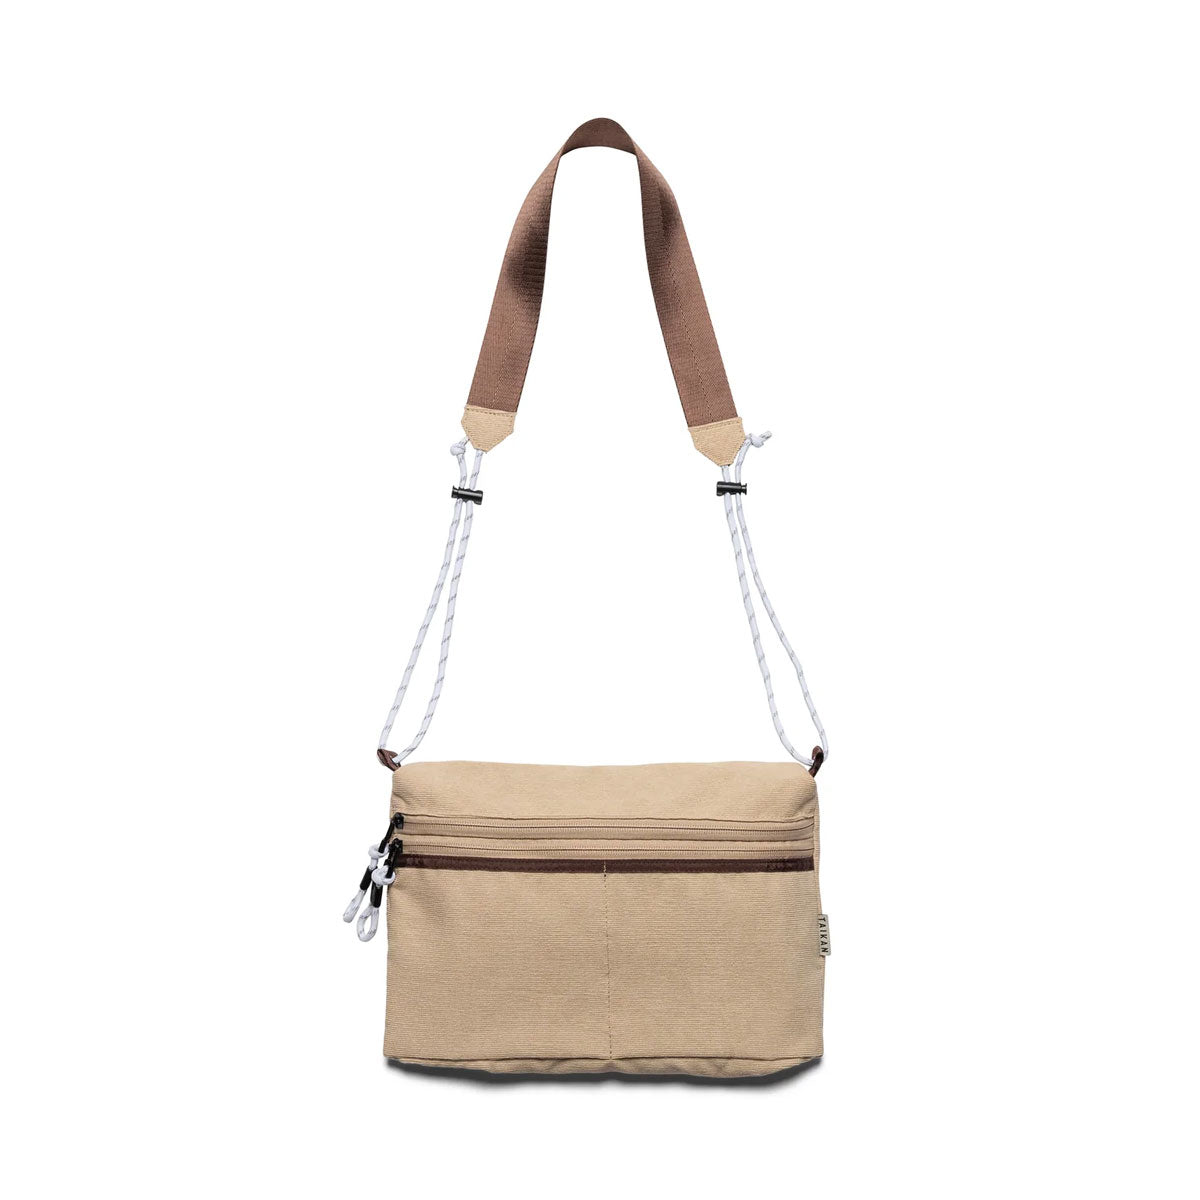 Image of Taikan Sacoche Large (Beige)